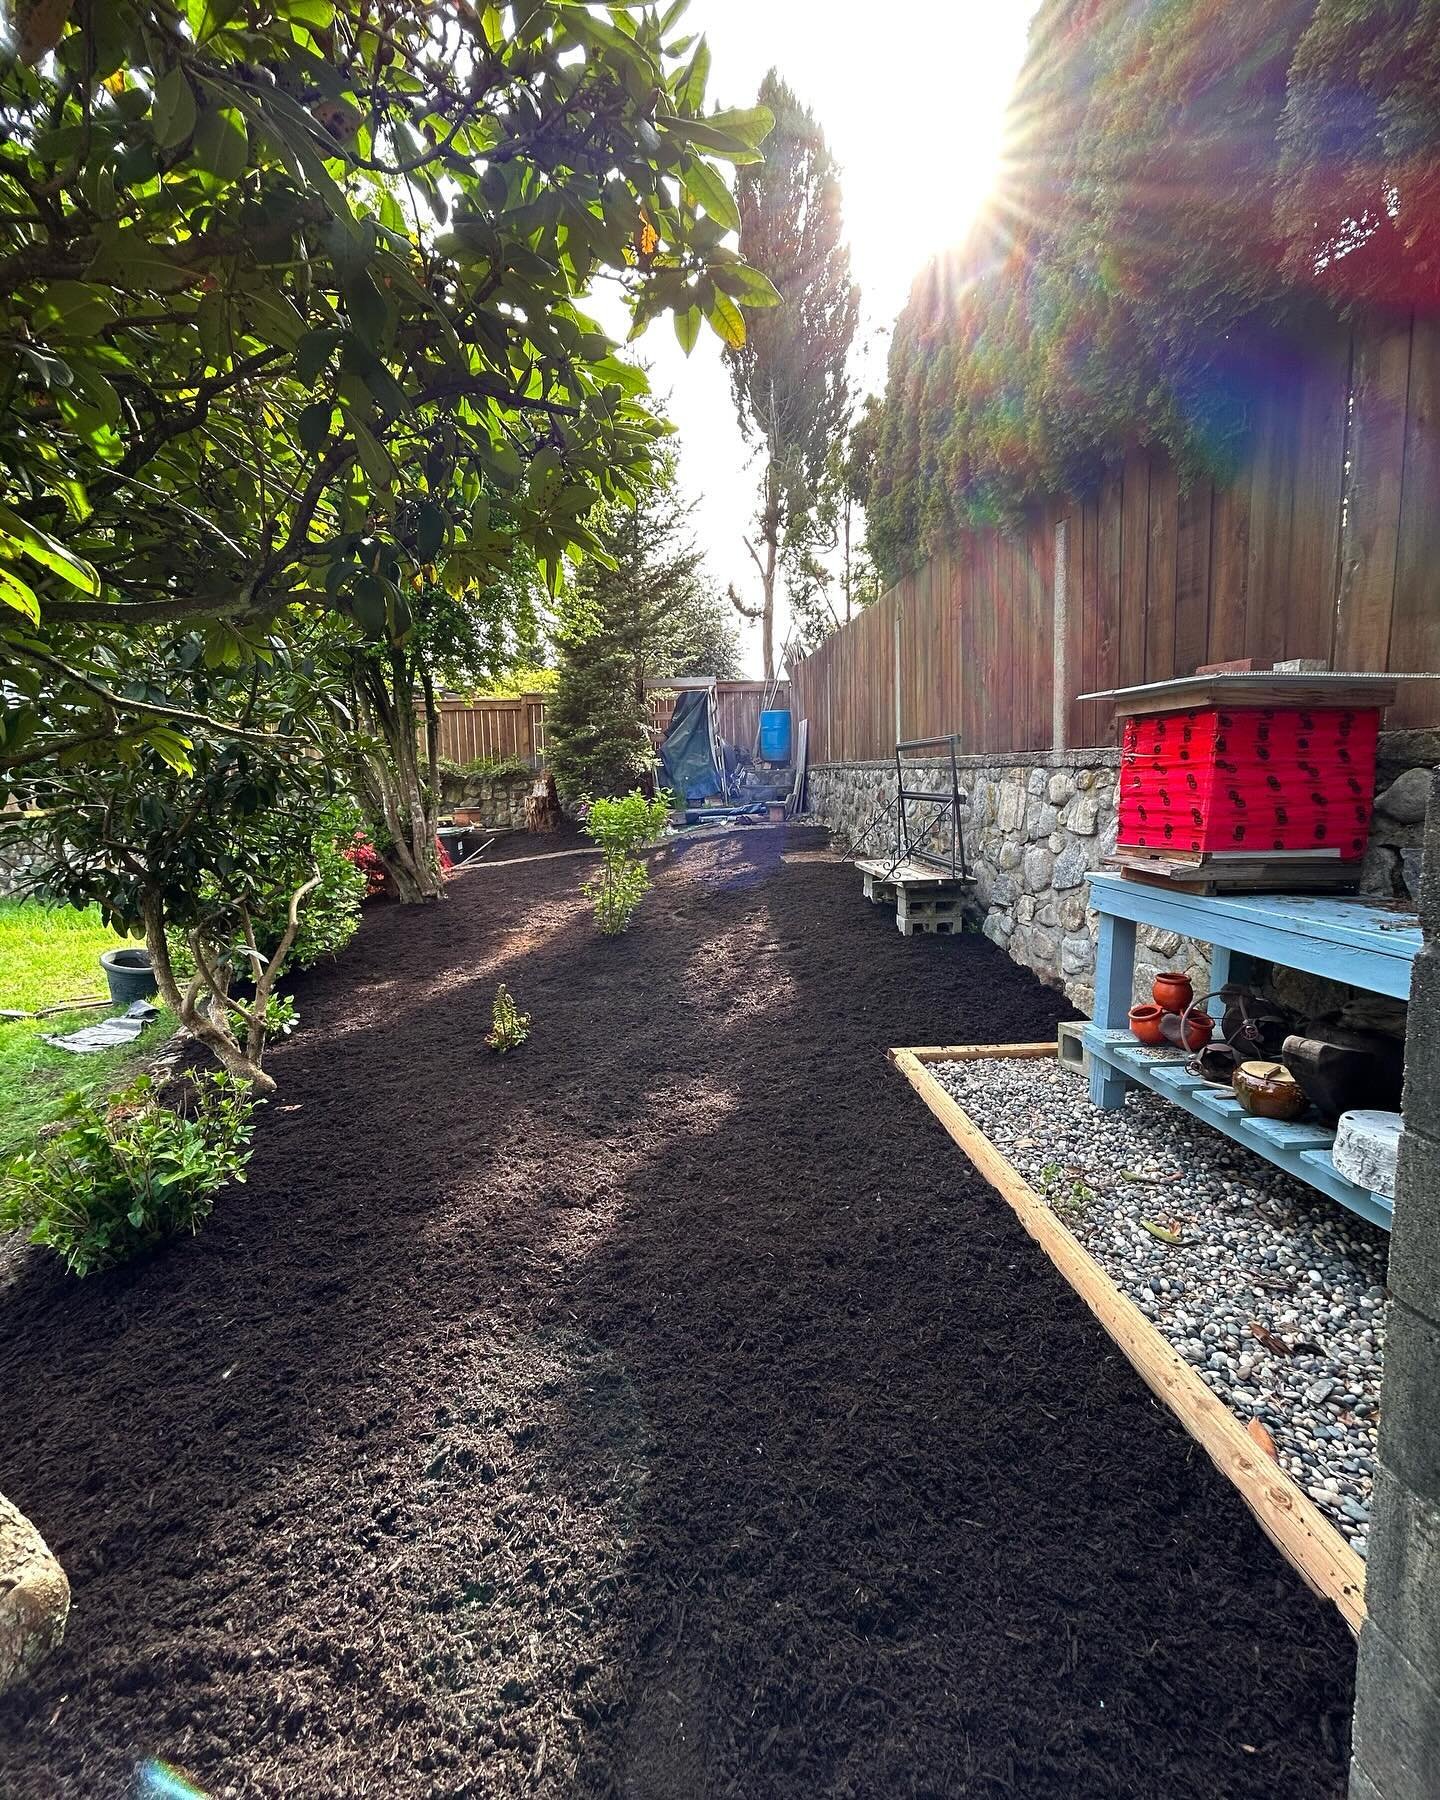 Swipe to see what was underneath these beautiful transformations ➡️
🌱 A whole lot of weeding 
🌱 Fresh landscape fabric laid to prevent any remaining weeds from poking through 
🌱 Topped with a layer of fresh mulch for an aesthetically pleasing look